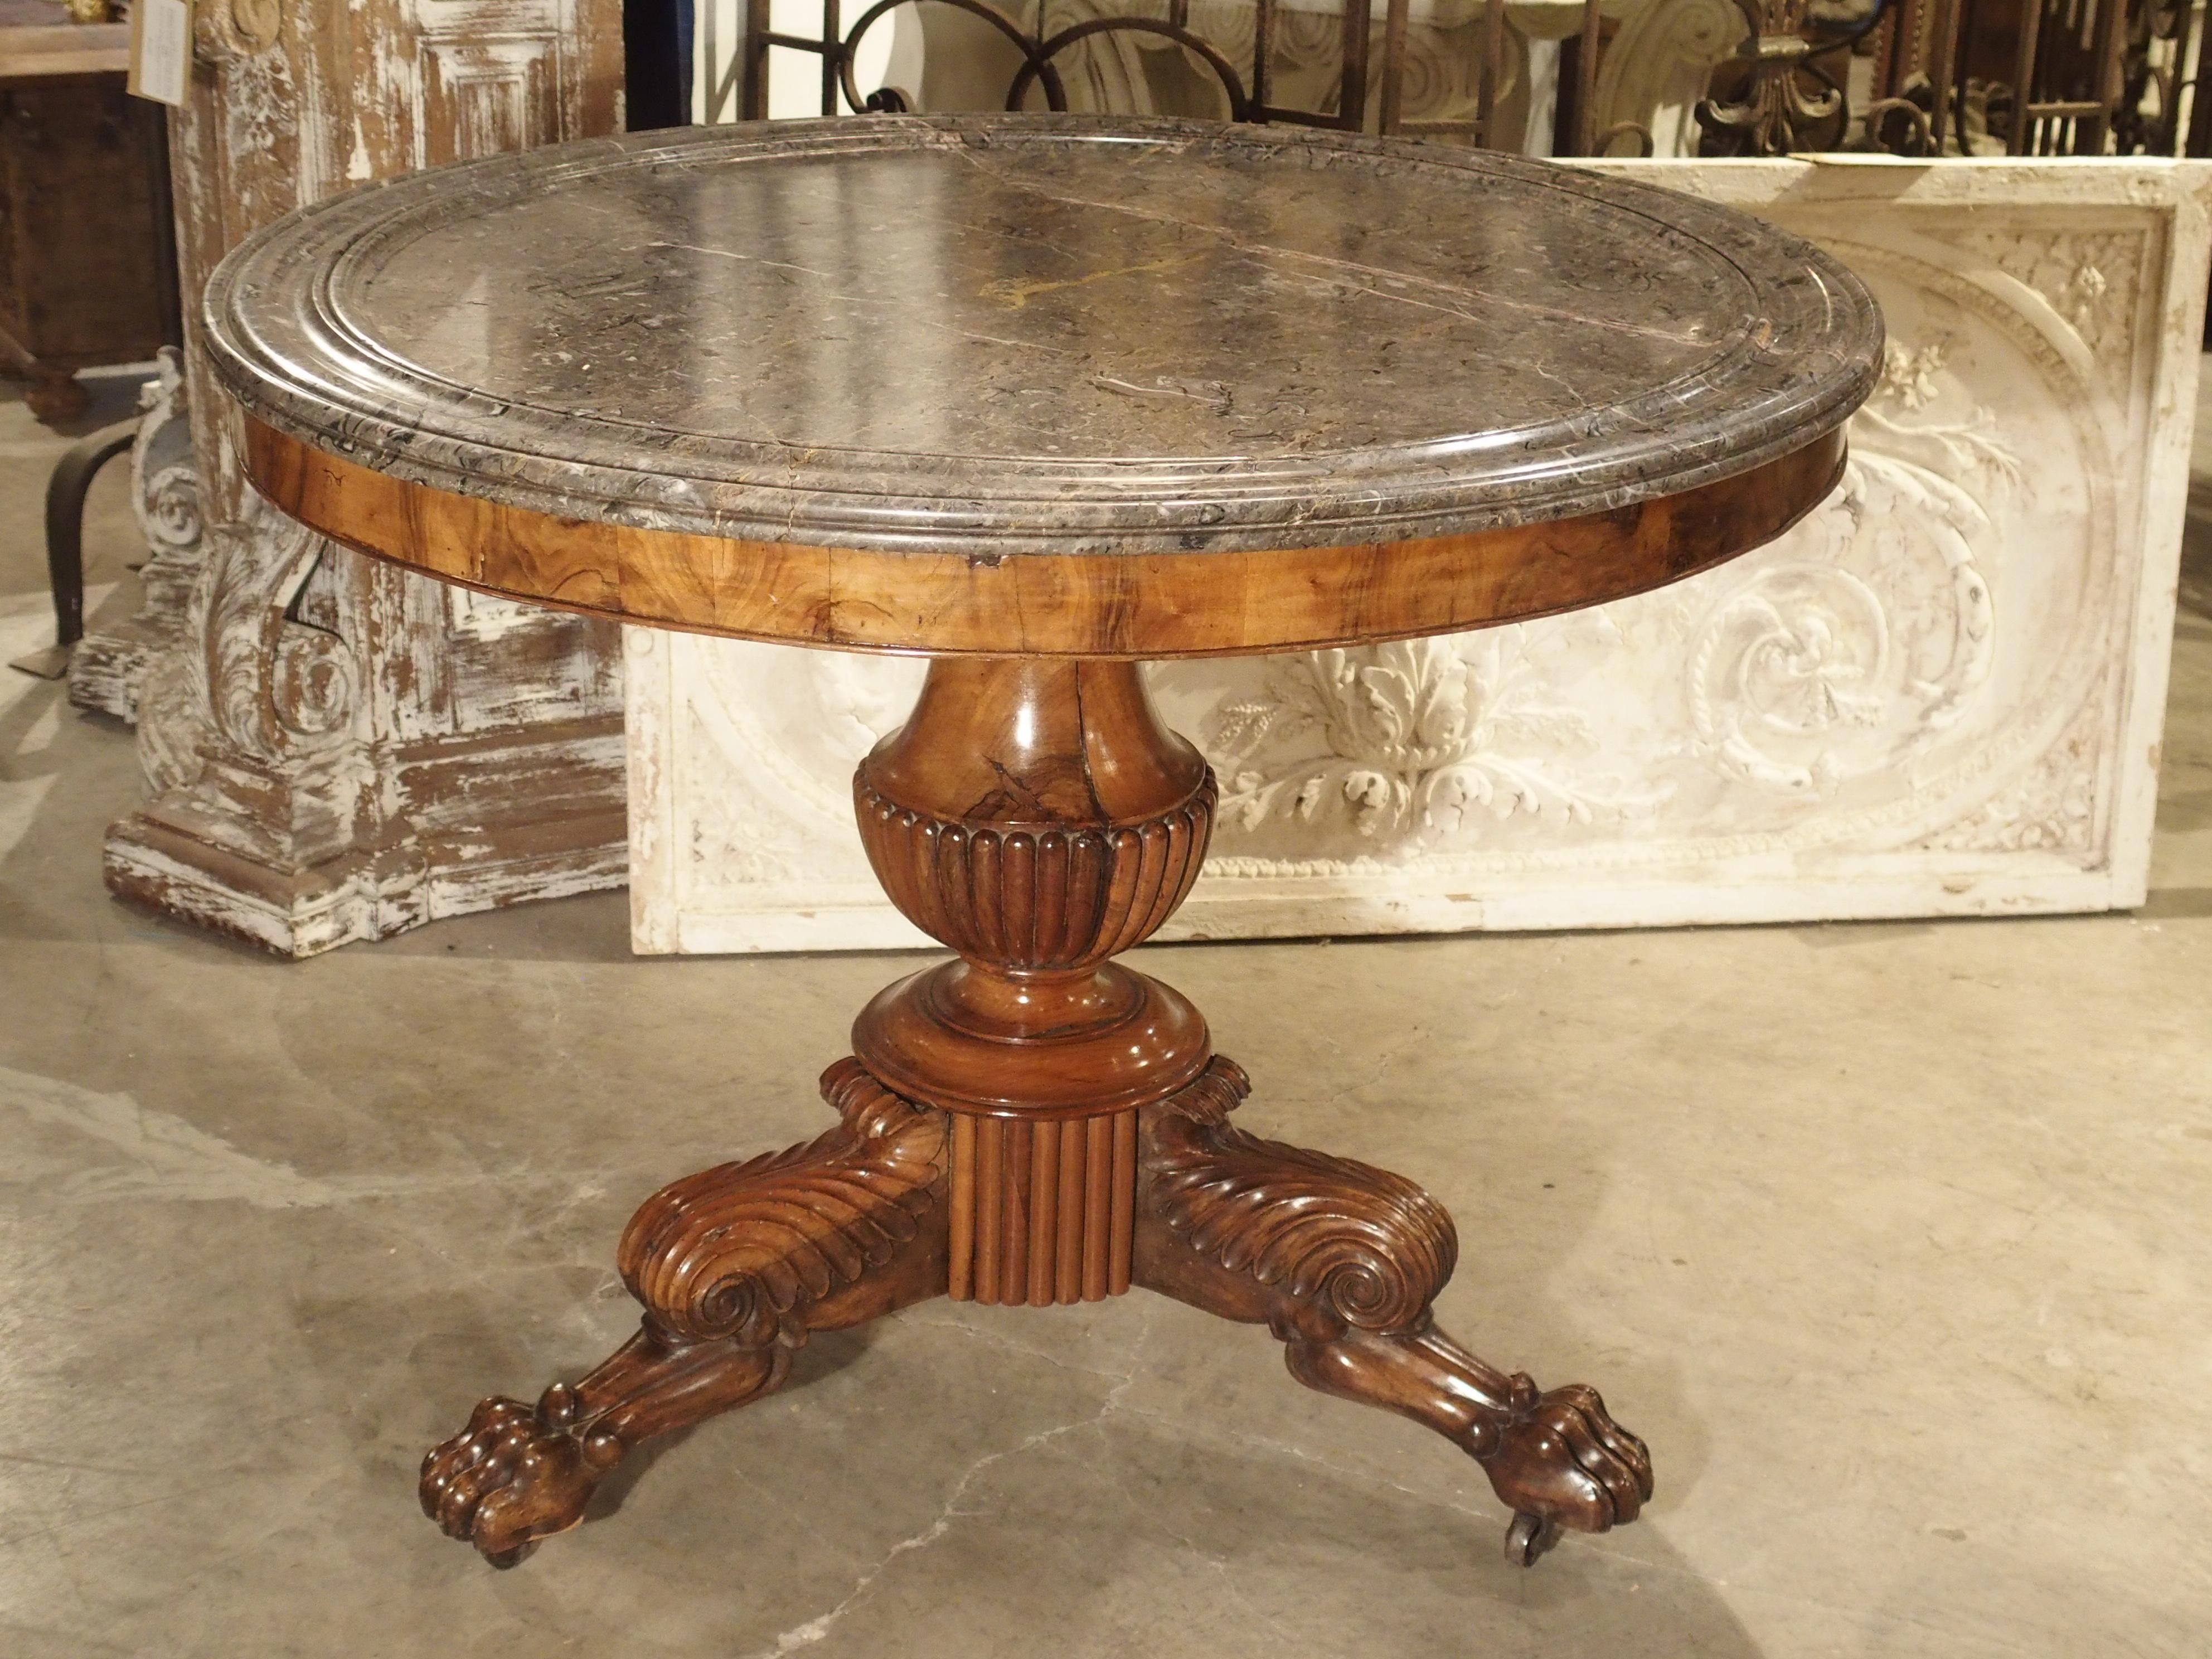 From France, this beautifully designed round mahogany table is in the French Empire style. It has a grey and white veined marble top with grooved moldings at the periphery. Just beneath the stone, is an unadorned, burled mahogany veneer. The central